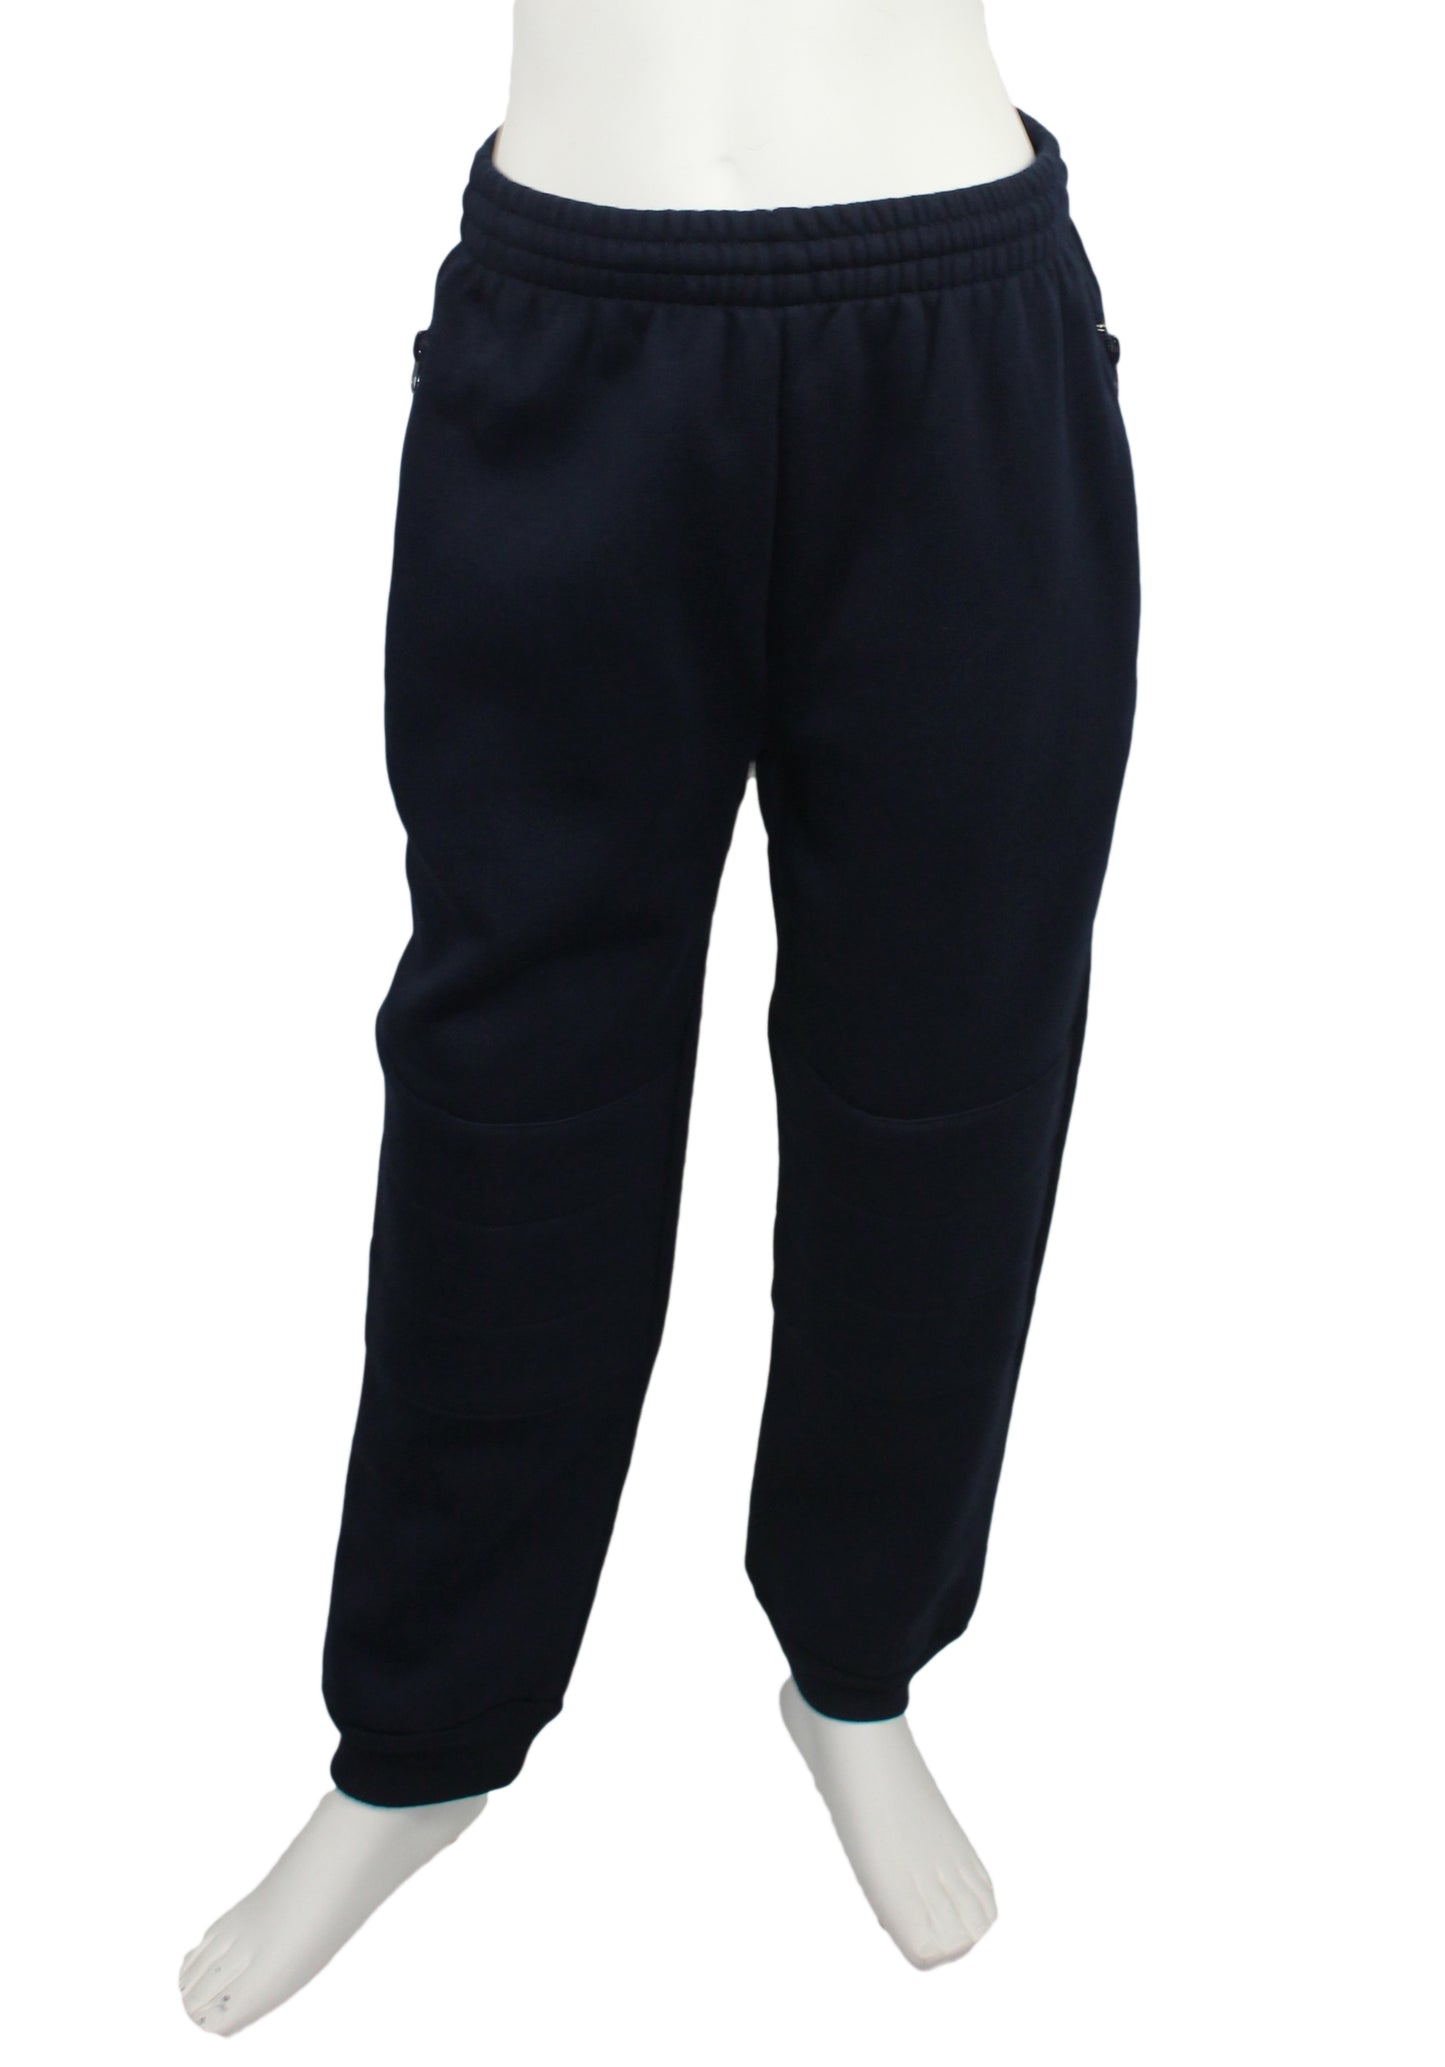 Navy/Cyclone AKOA Cuffed Track Pant (PTP) - for Teesdale School